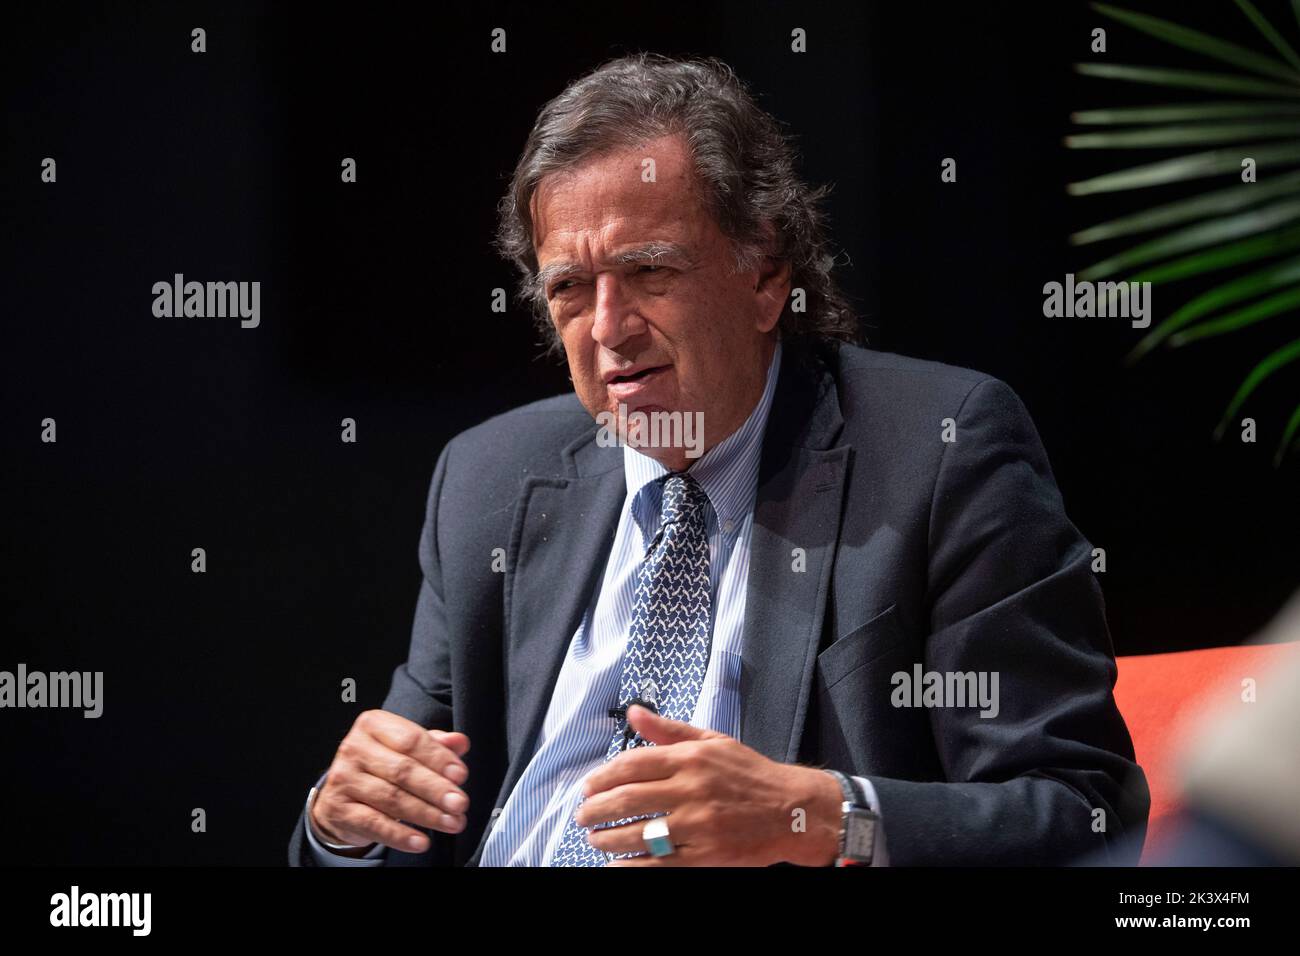 Former New Mexico governor and noted negotiator BILL RICHARDSON during an interview session at the annual Texas Tribune Festival in downtown Austin on September 24, 2022. Stock Photo